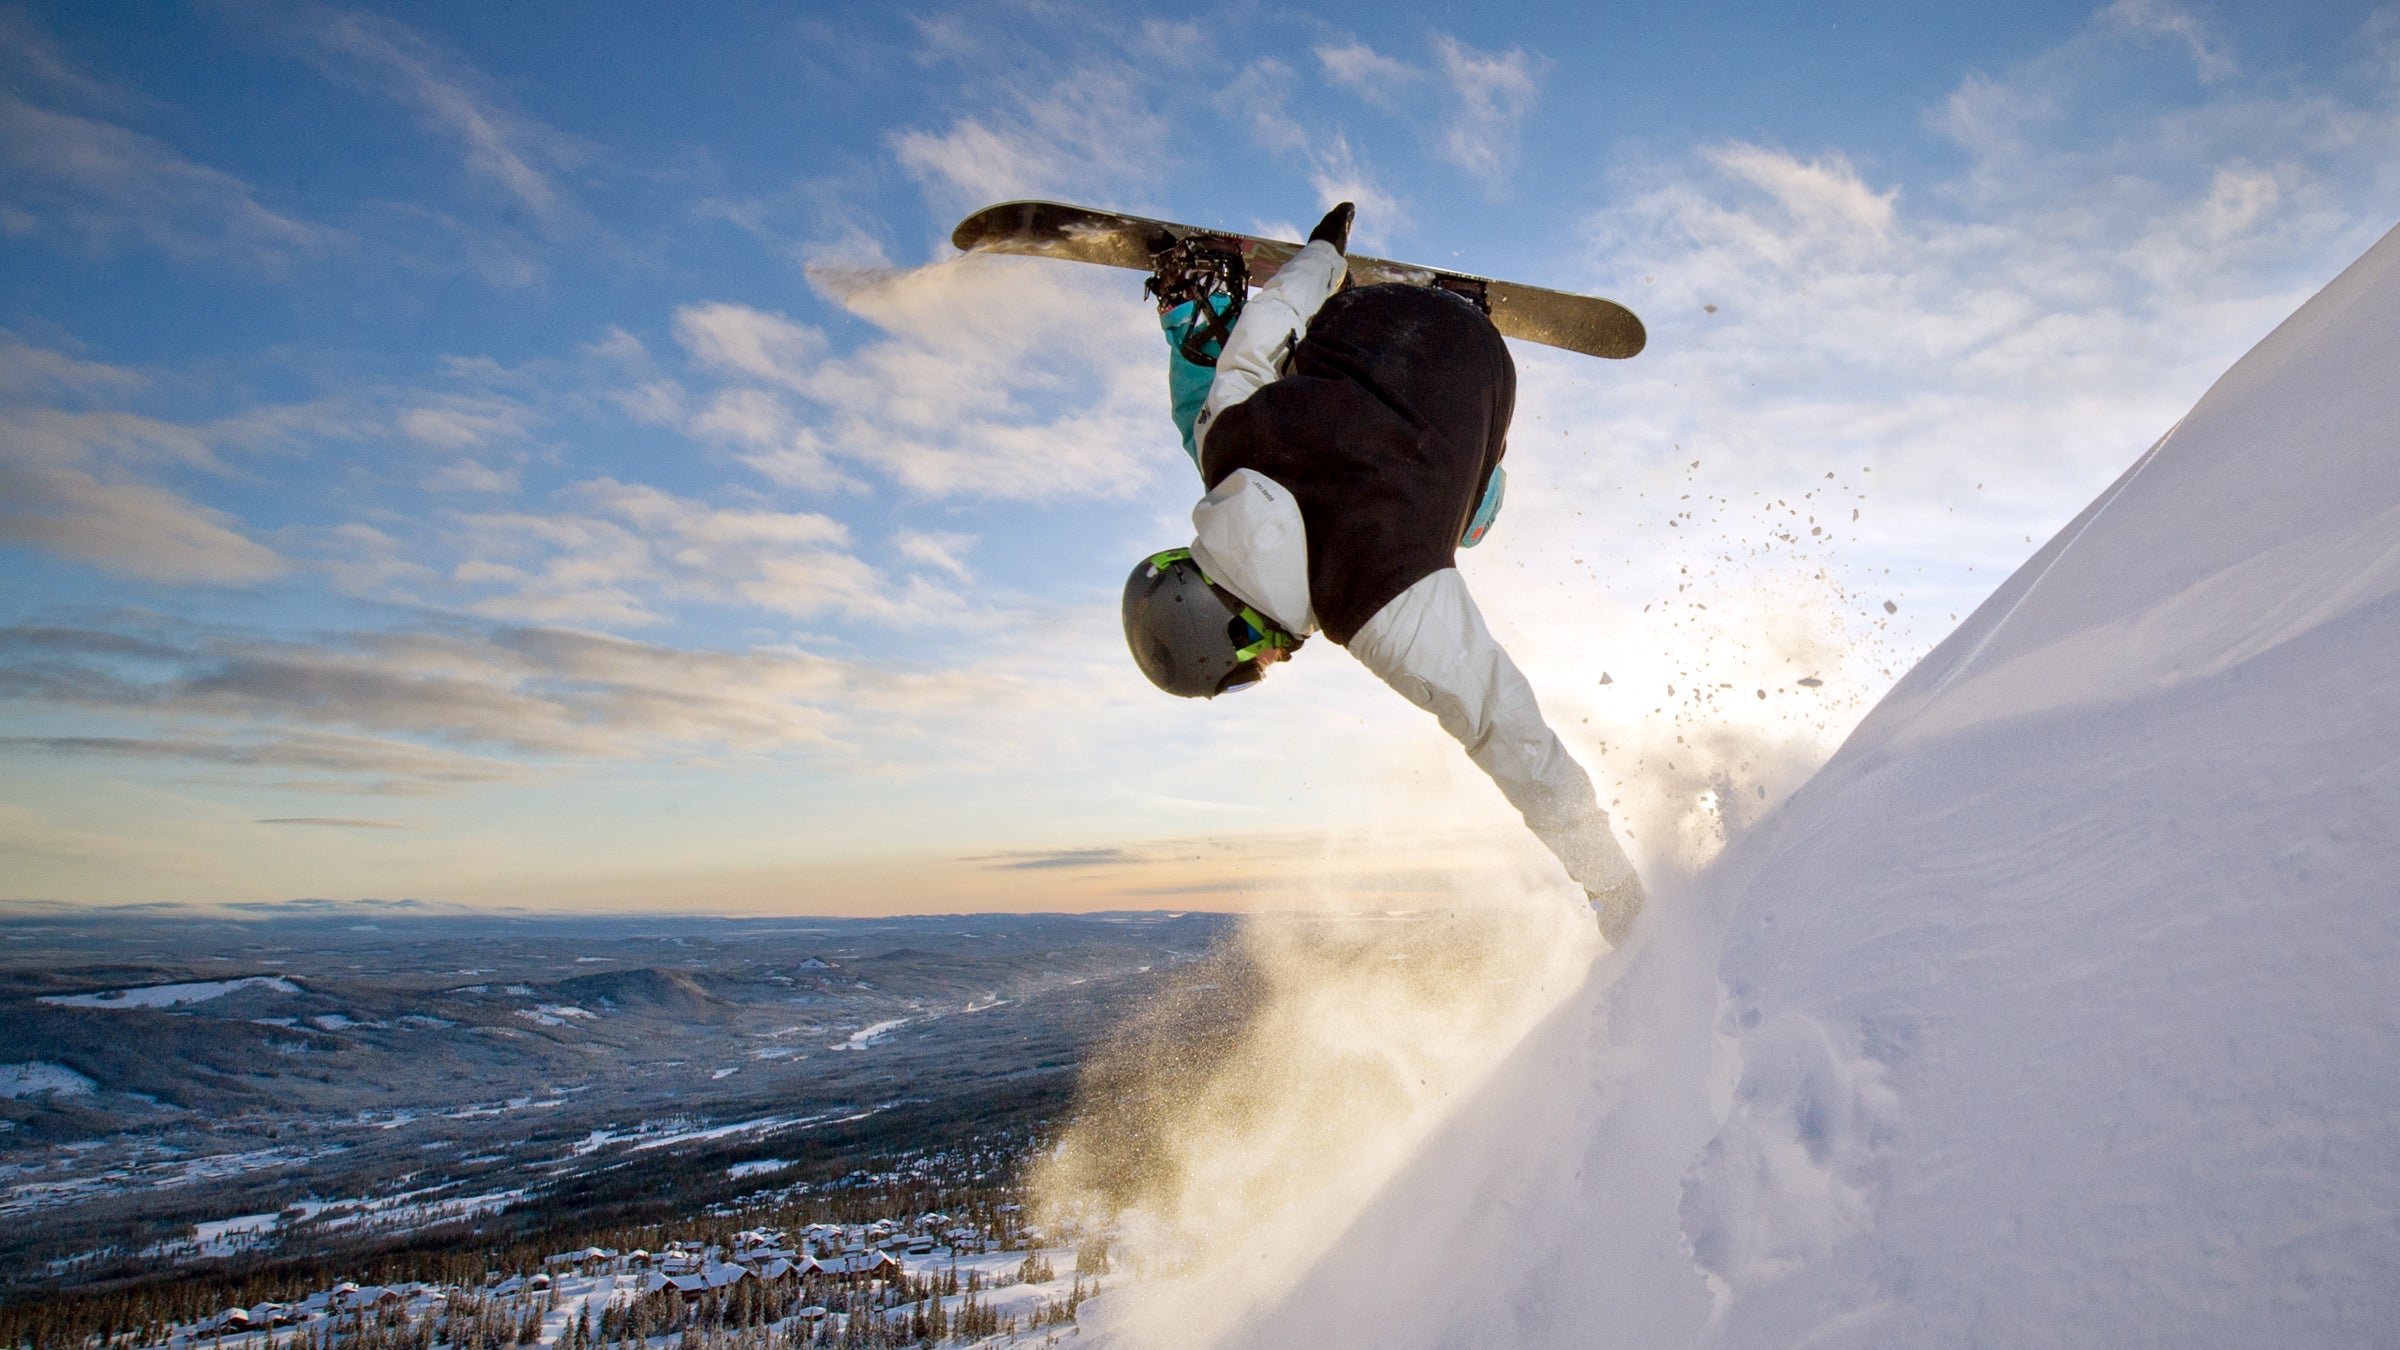 rijm Afgrond Gouverneur Which is a Better Workout: Skiing or Snowboarding? - Outside Online